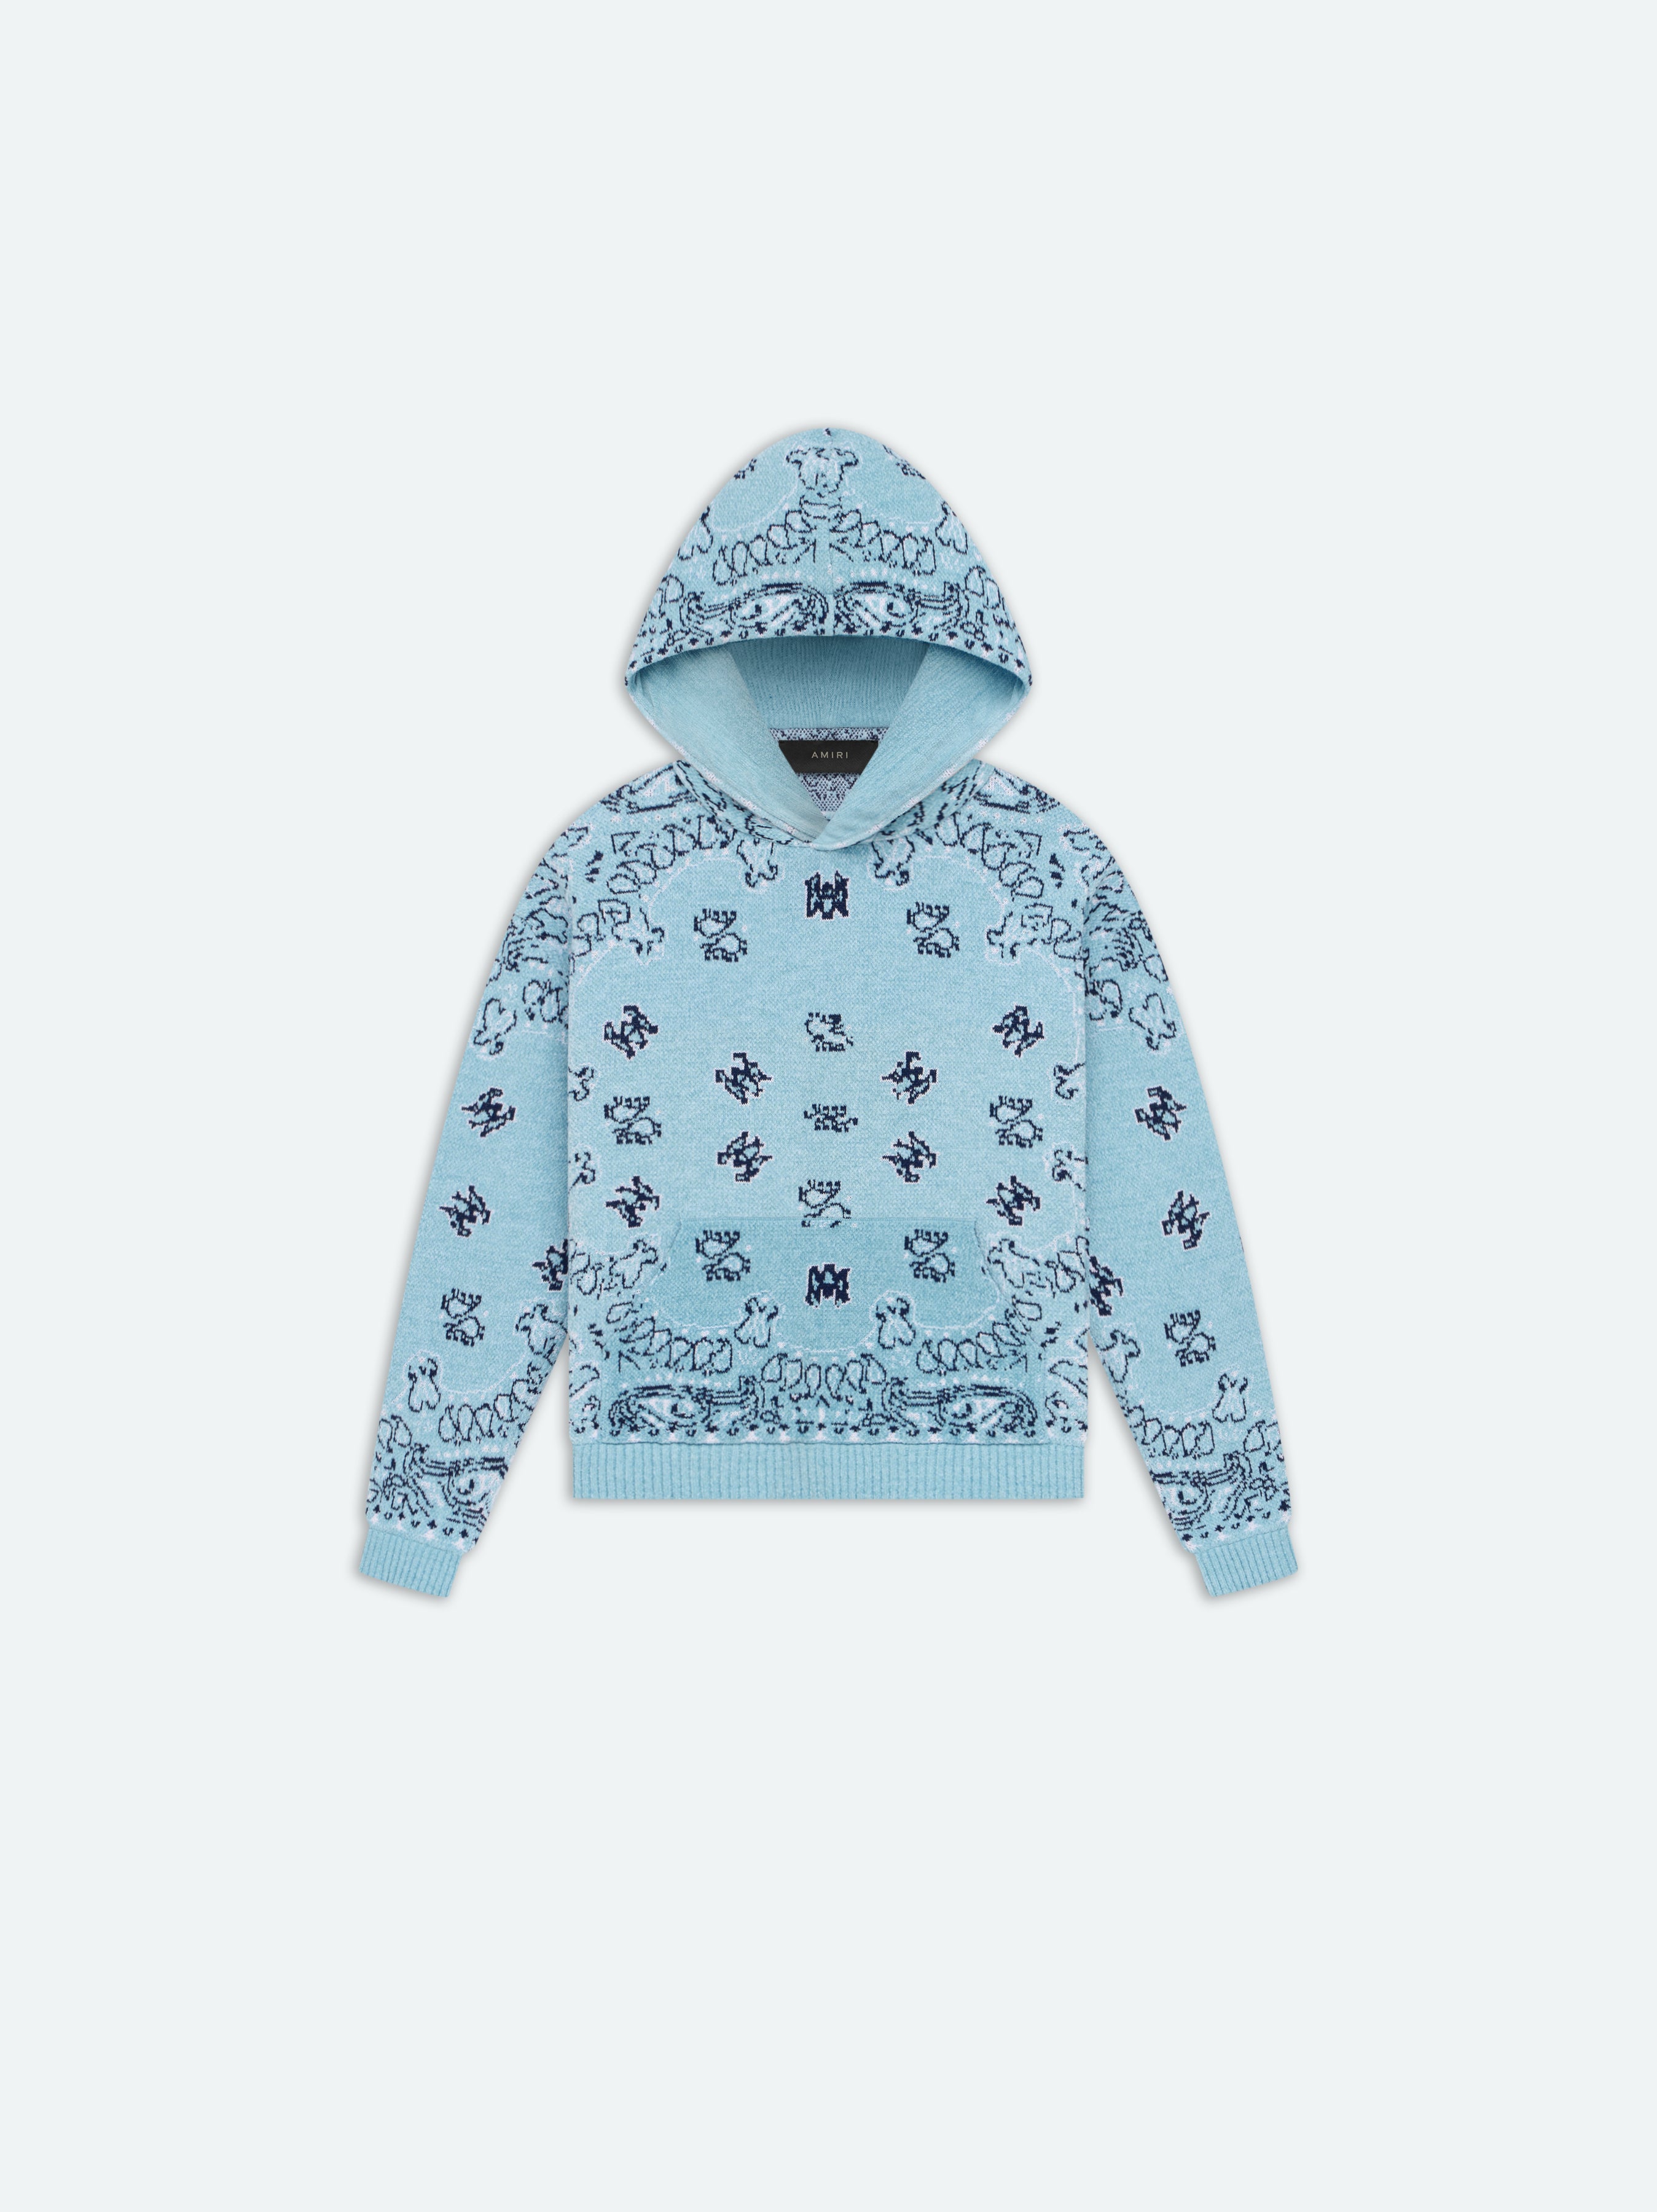 Product KIDS - BANDANA HOODIE - Air Blue featured image